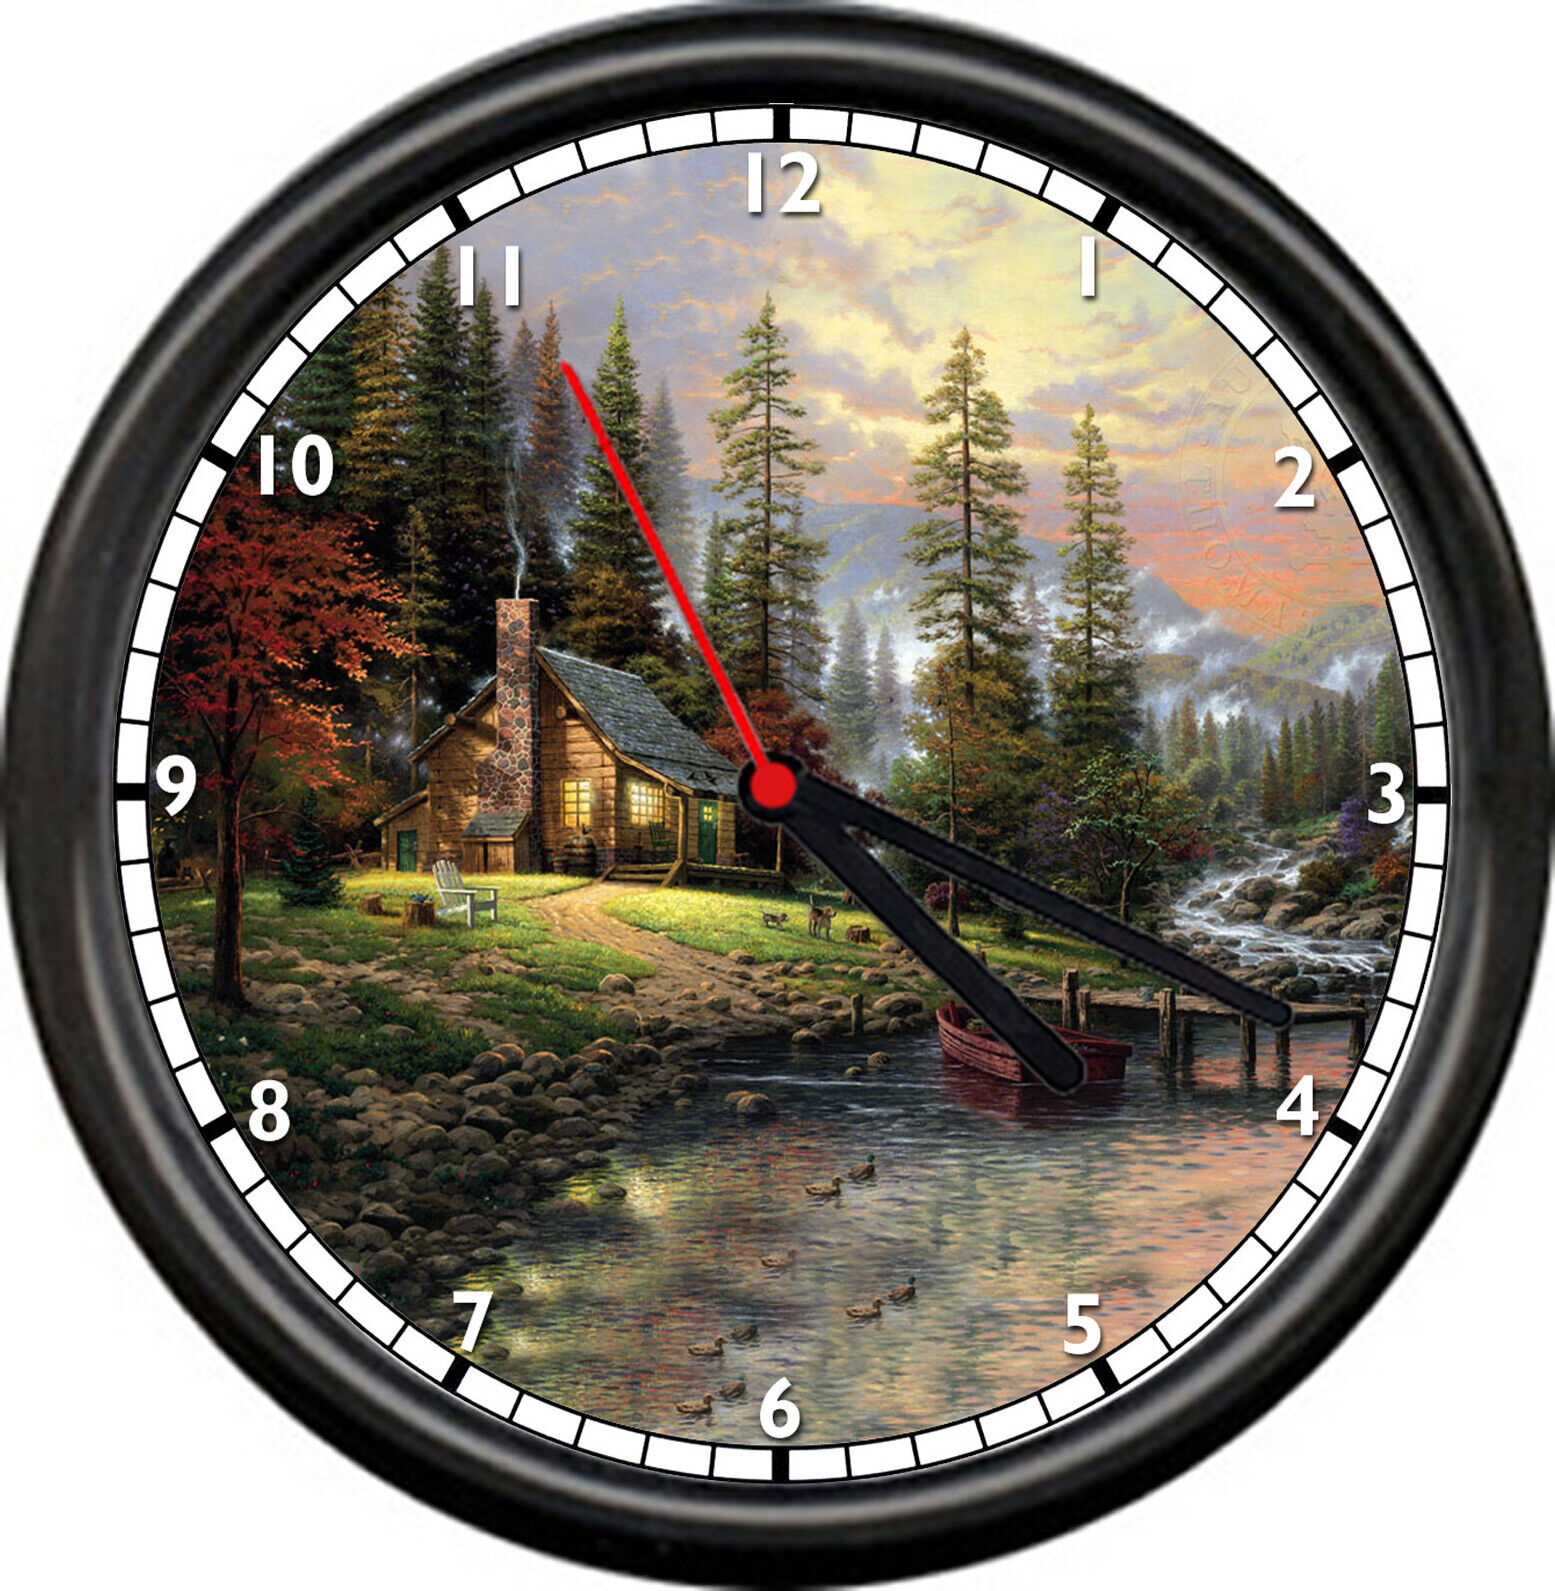 Cabin In The Woods River Personalized Your Name Script Relax Peaceful Wall Clock